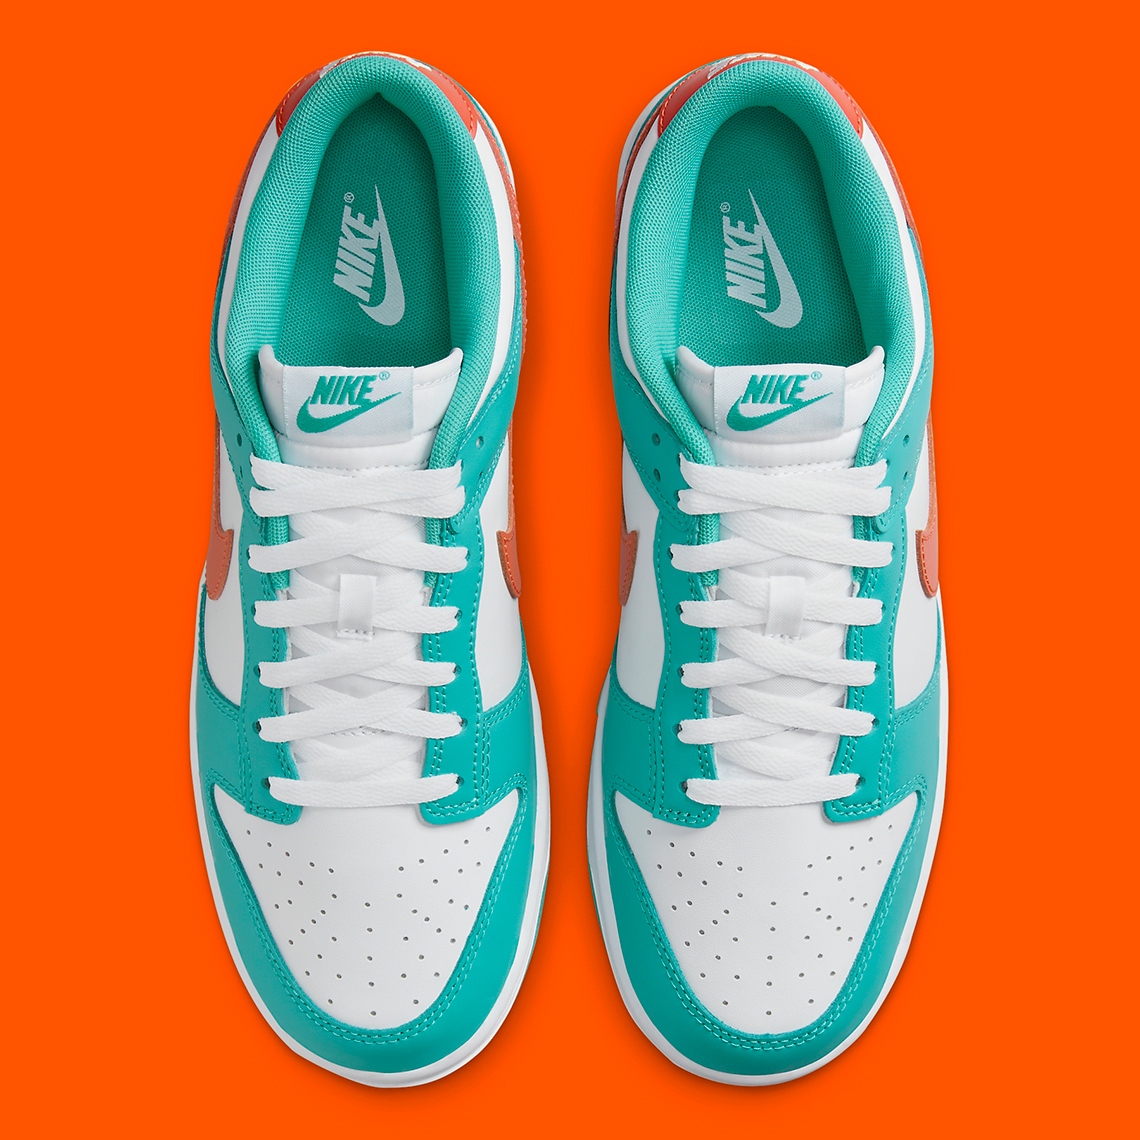 University Gold Gives The Nike Plus A Sweet Look Dolphins Dv0833 102 Release Date 2